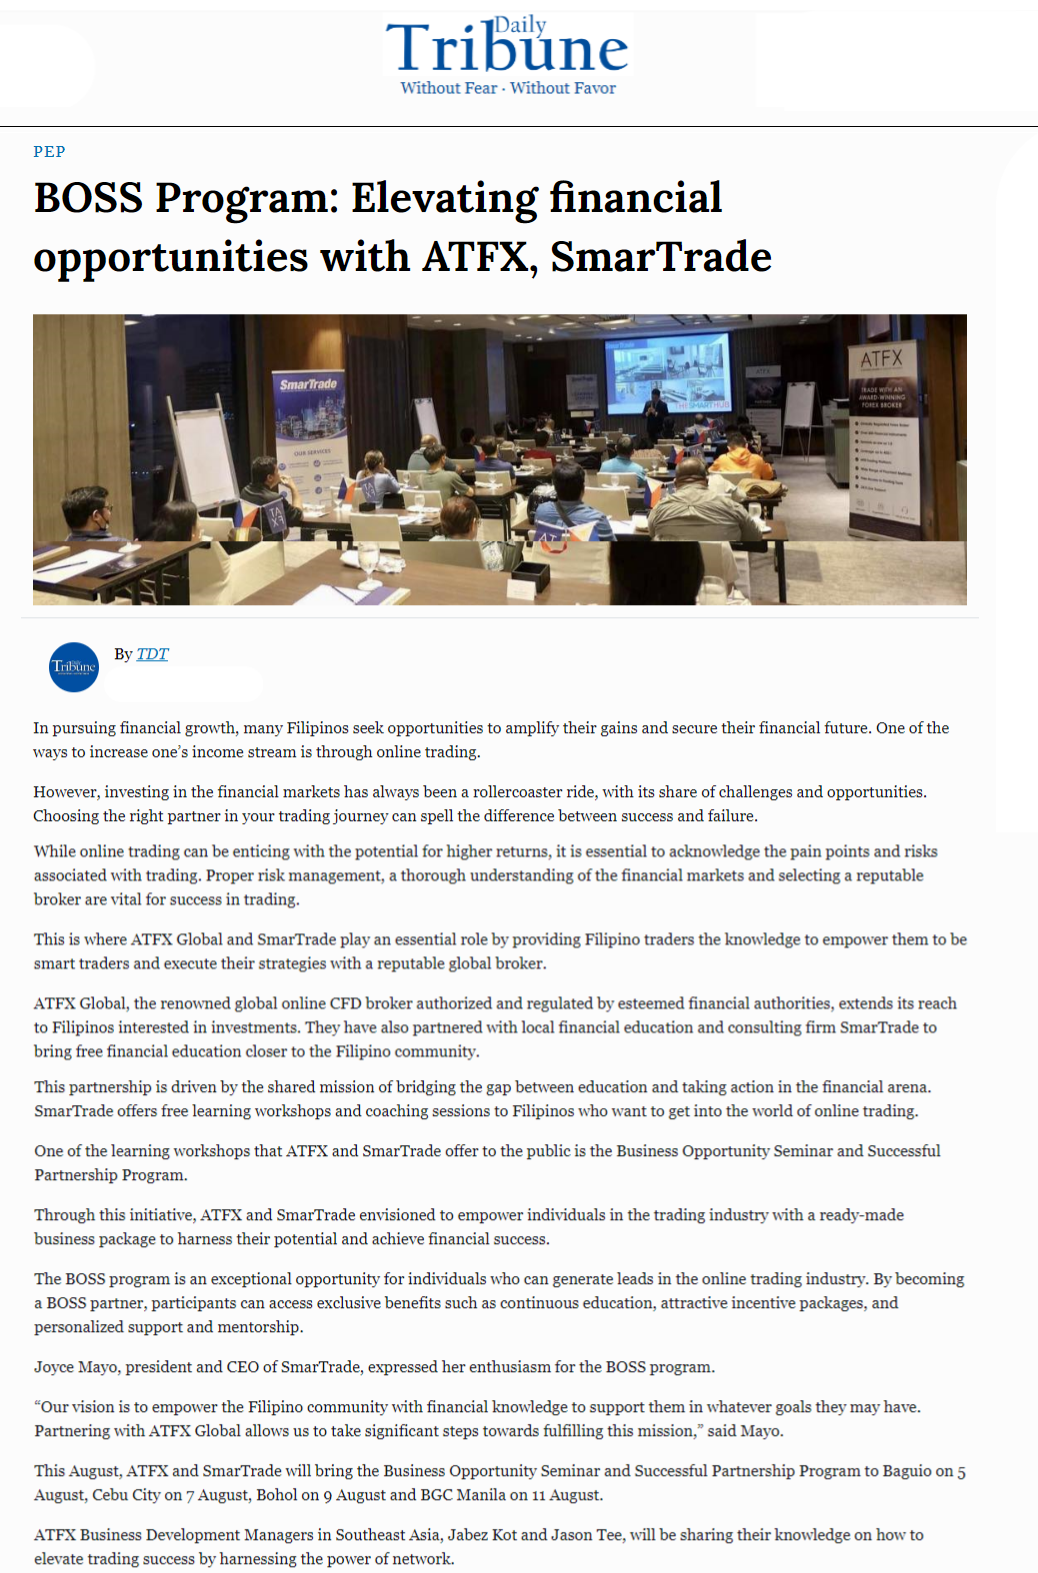 Deepening services for upgrading investment and education,ATFXLaunch“boss”Plan to provide funding for Southeast Asian investors...592 / author:atfx2019 / PostsID:1725195